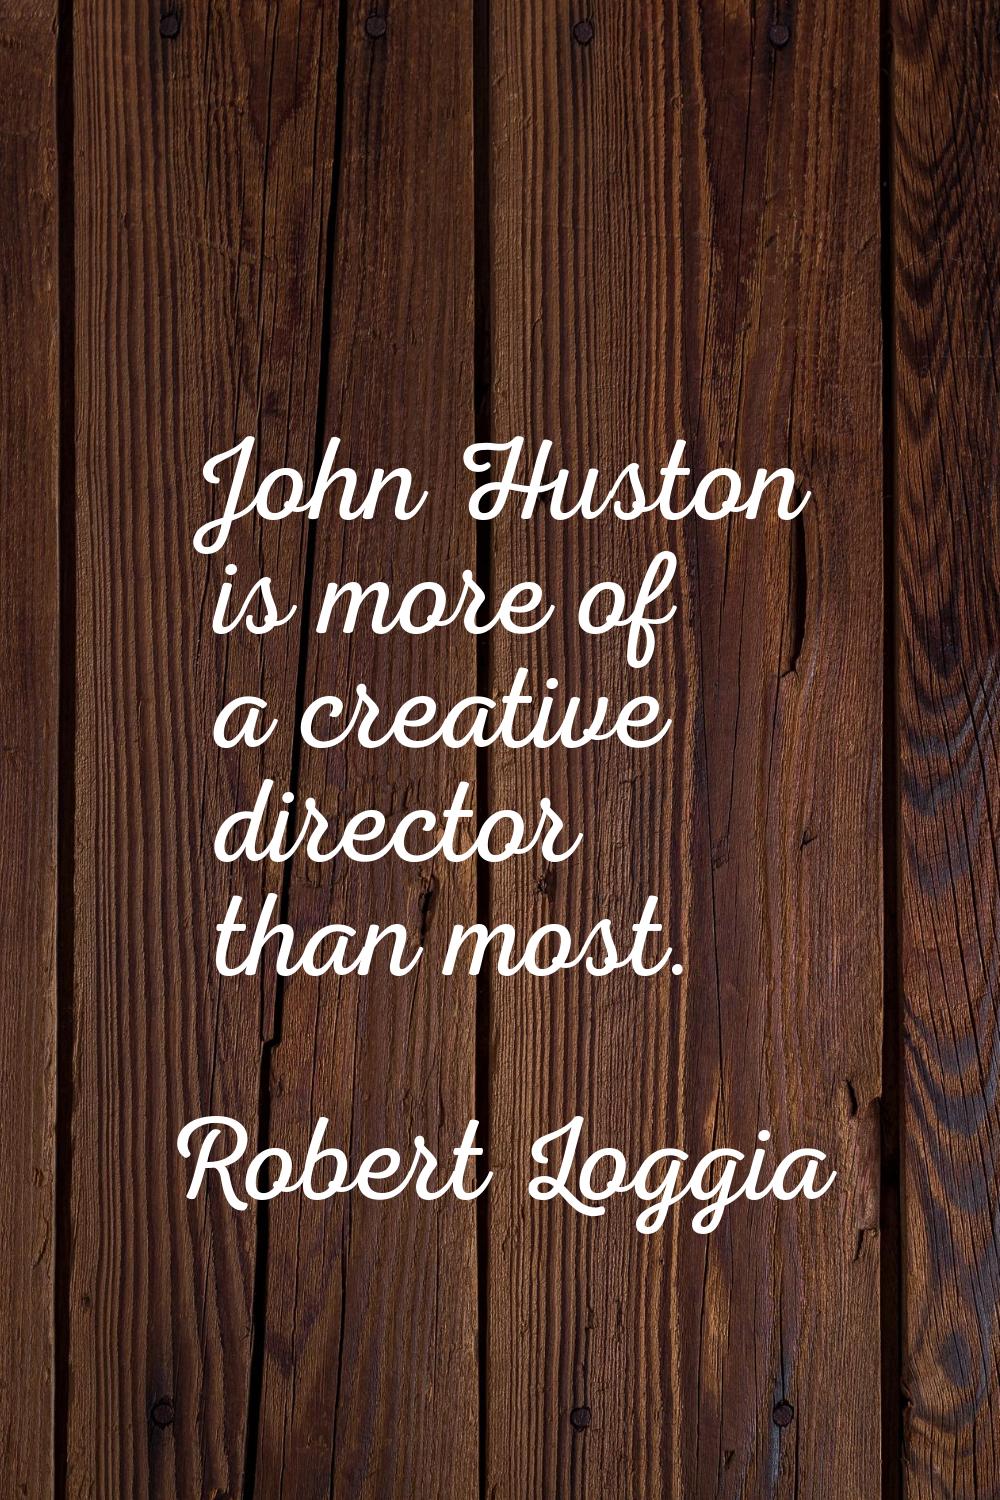 John Huston is more of a creative director than most.